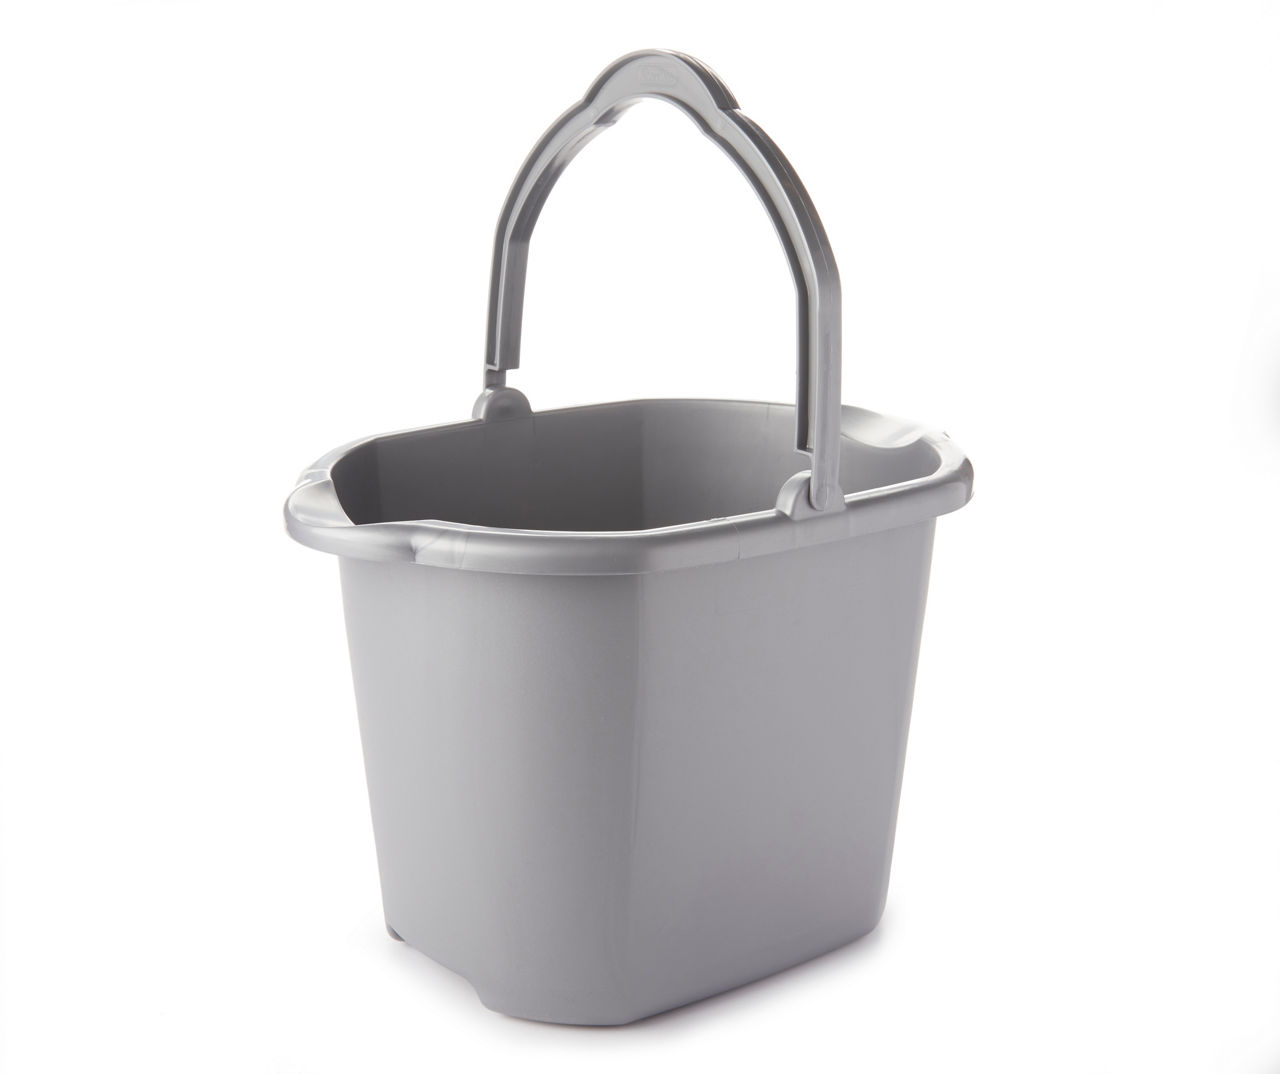  Prime-Line MP46750 Bucket with Handle and Spout, 10 Quart,  Plastic, Gray, Rugged, Heavy (Single Pack) : Health & Household